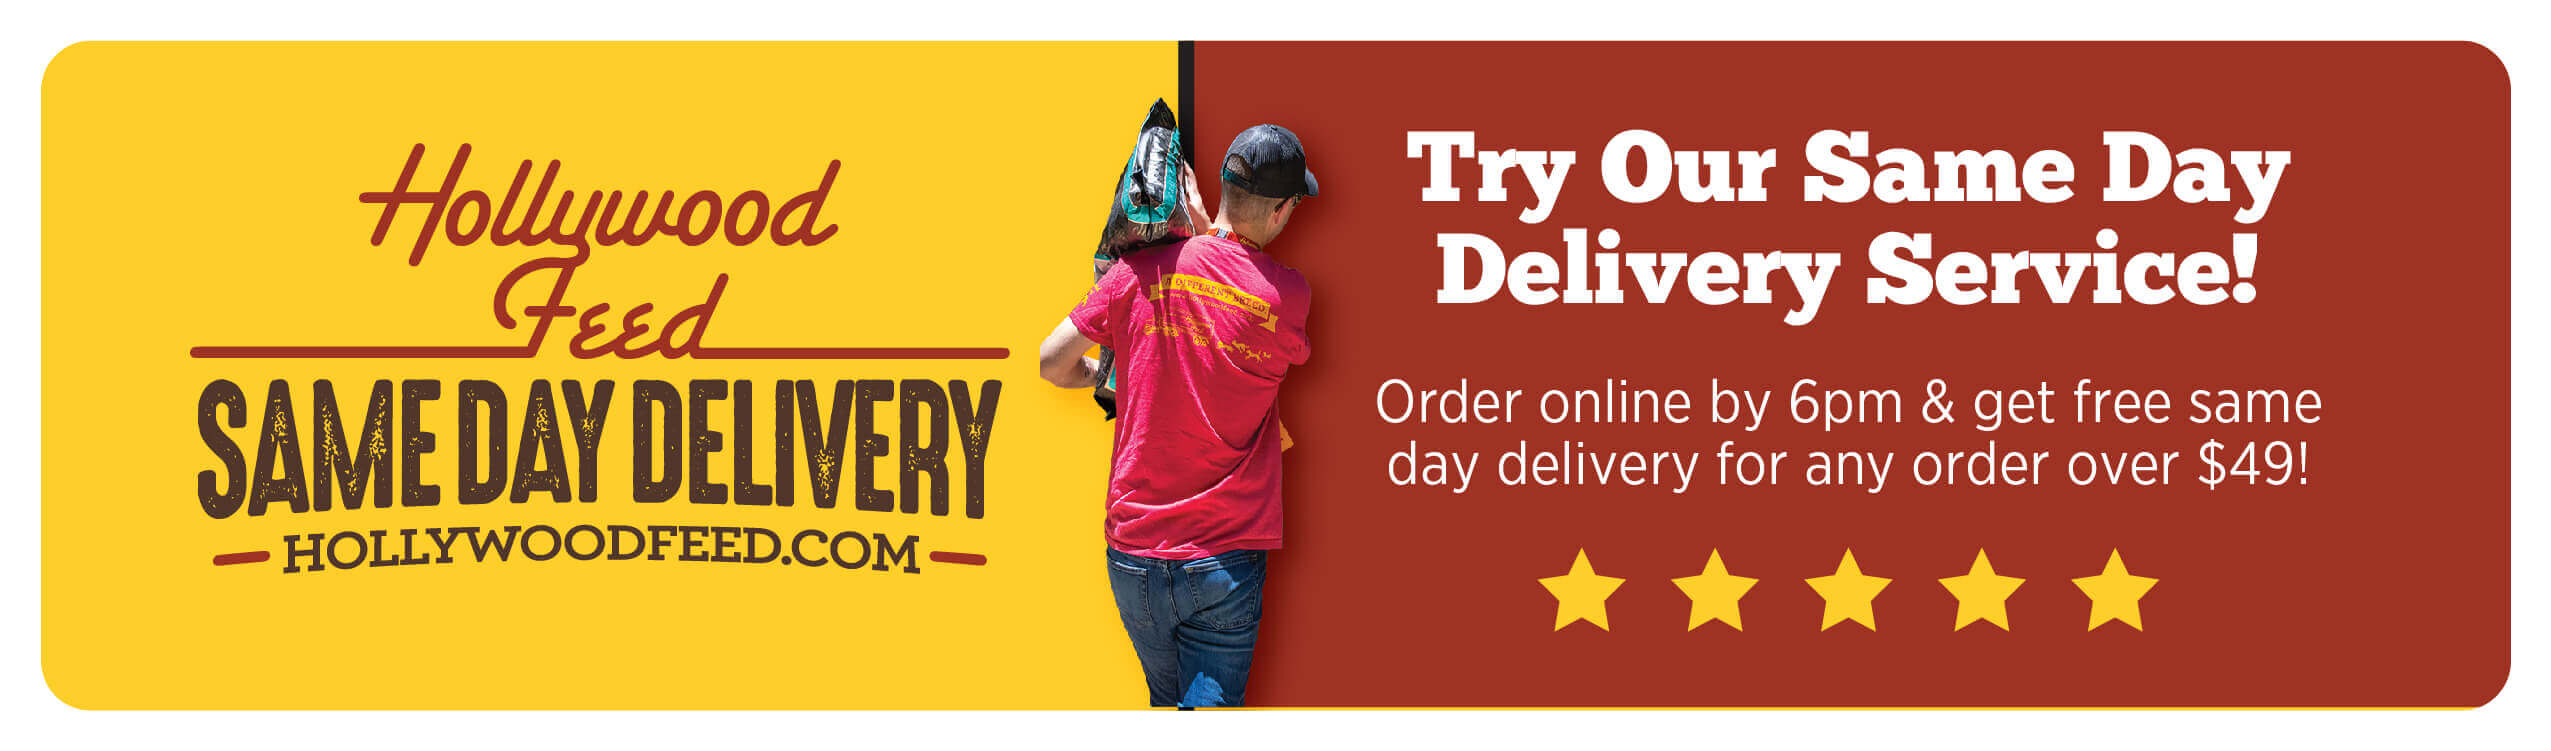 Same Day Dog Food Delivery, Hollywood Feed